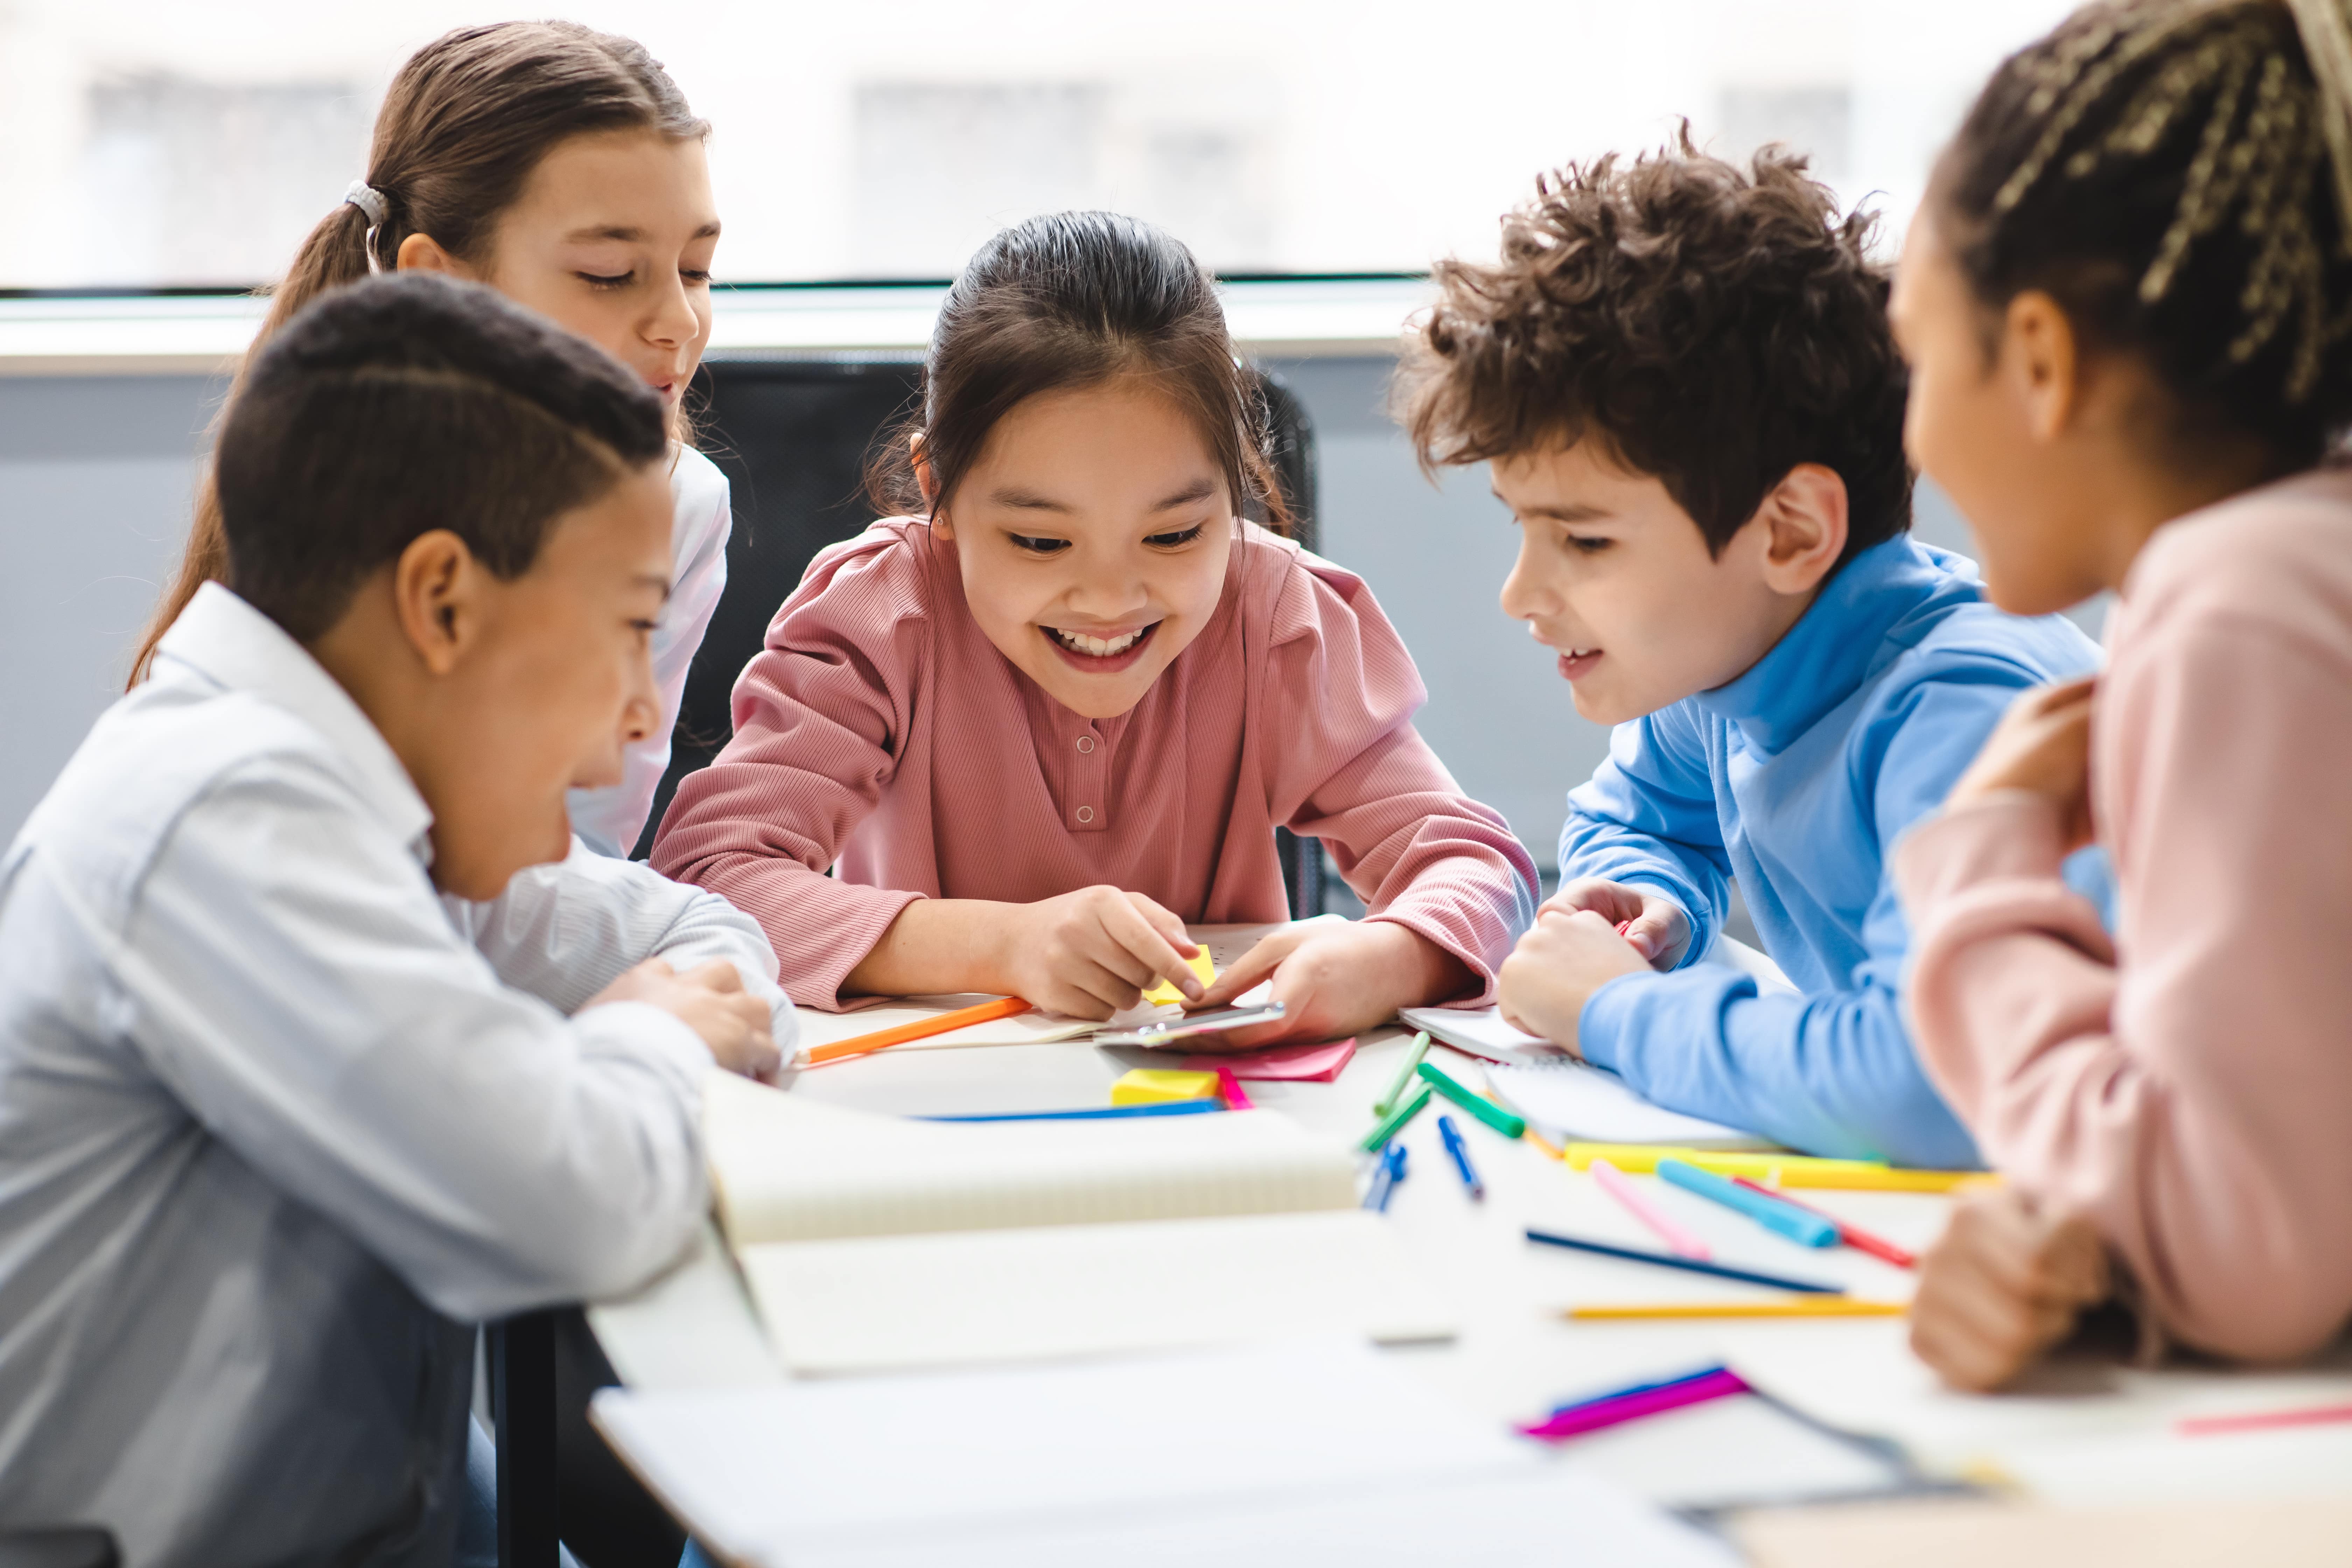 5 Strategies for Optimizing Small Group Instruction